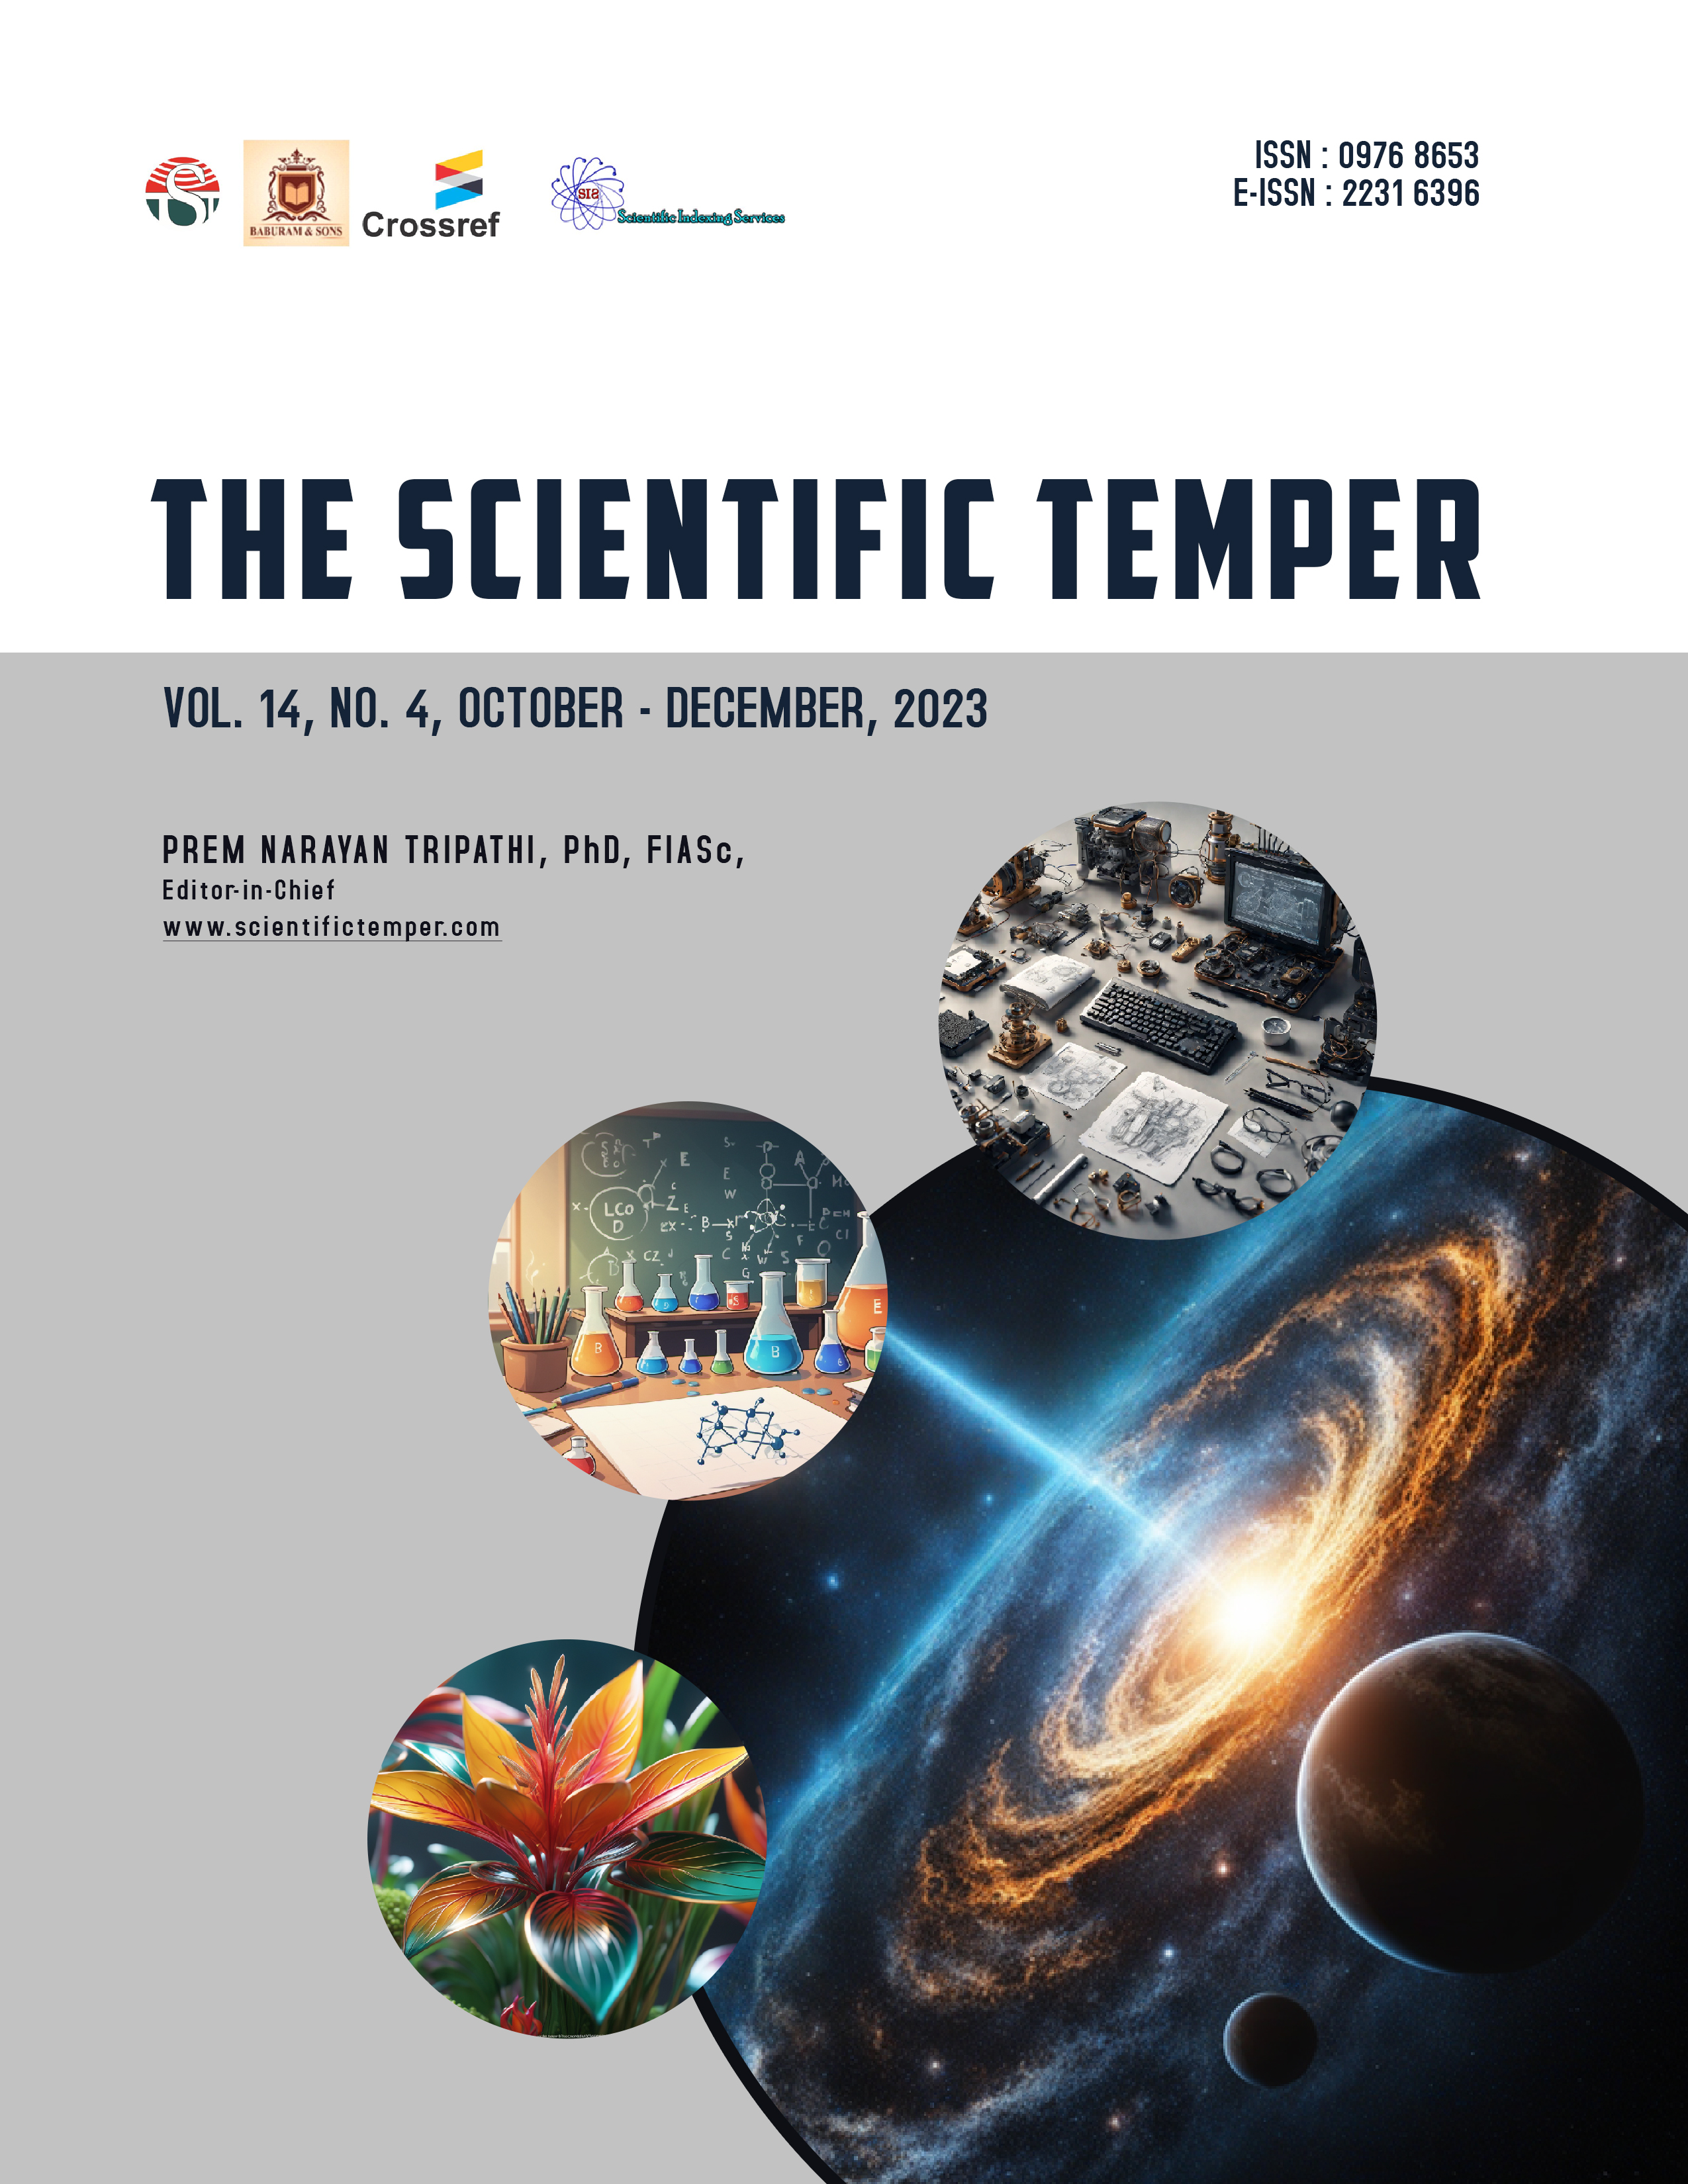 The Current issue of The Scientific Temper